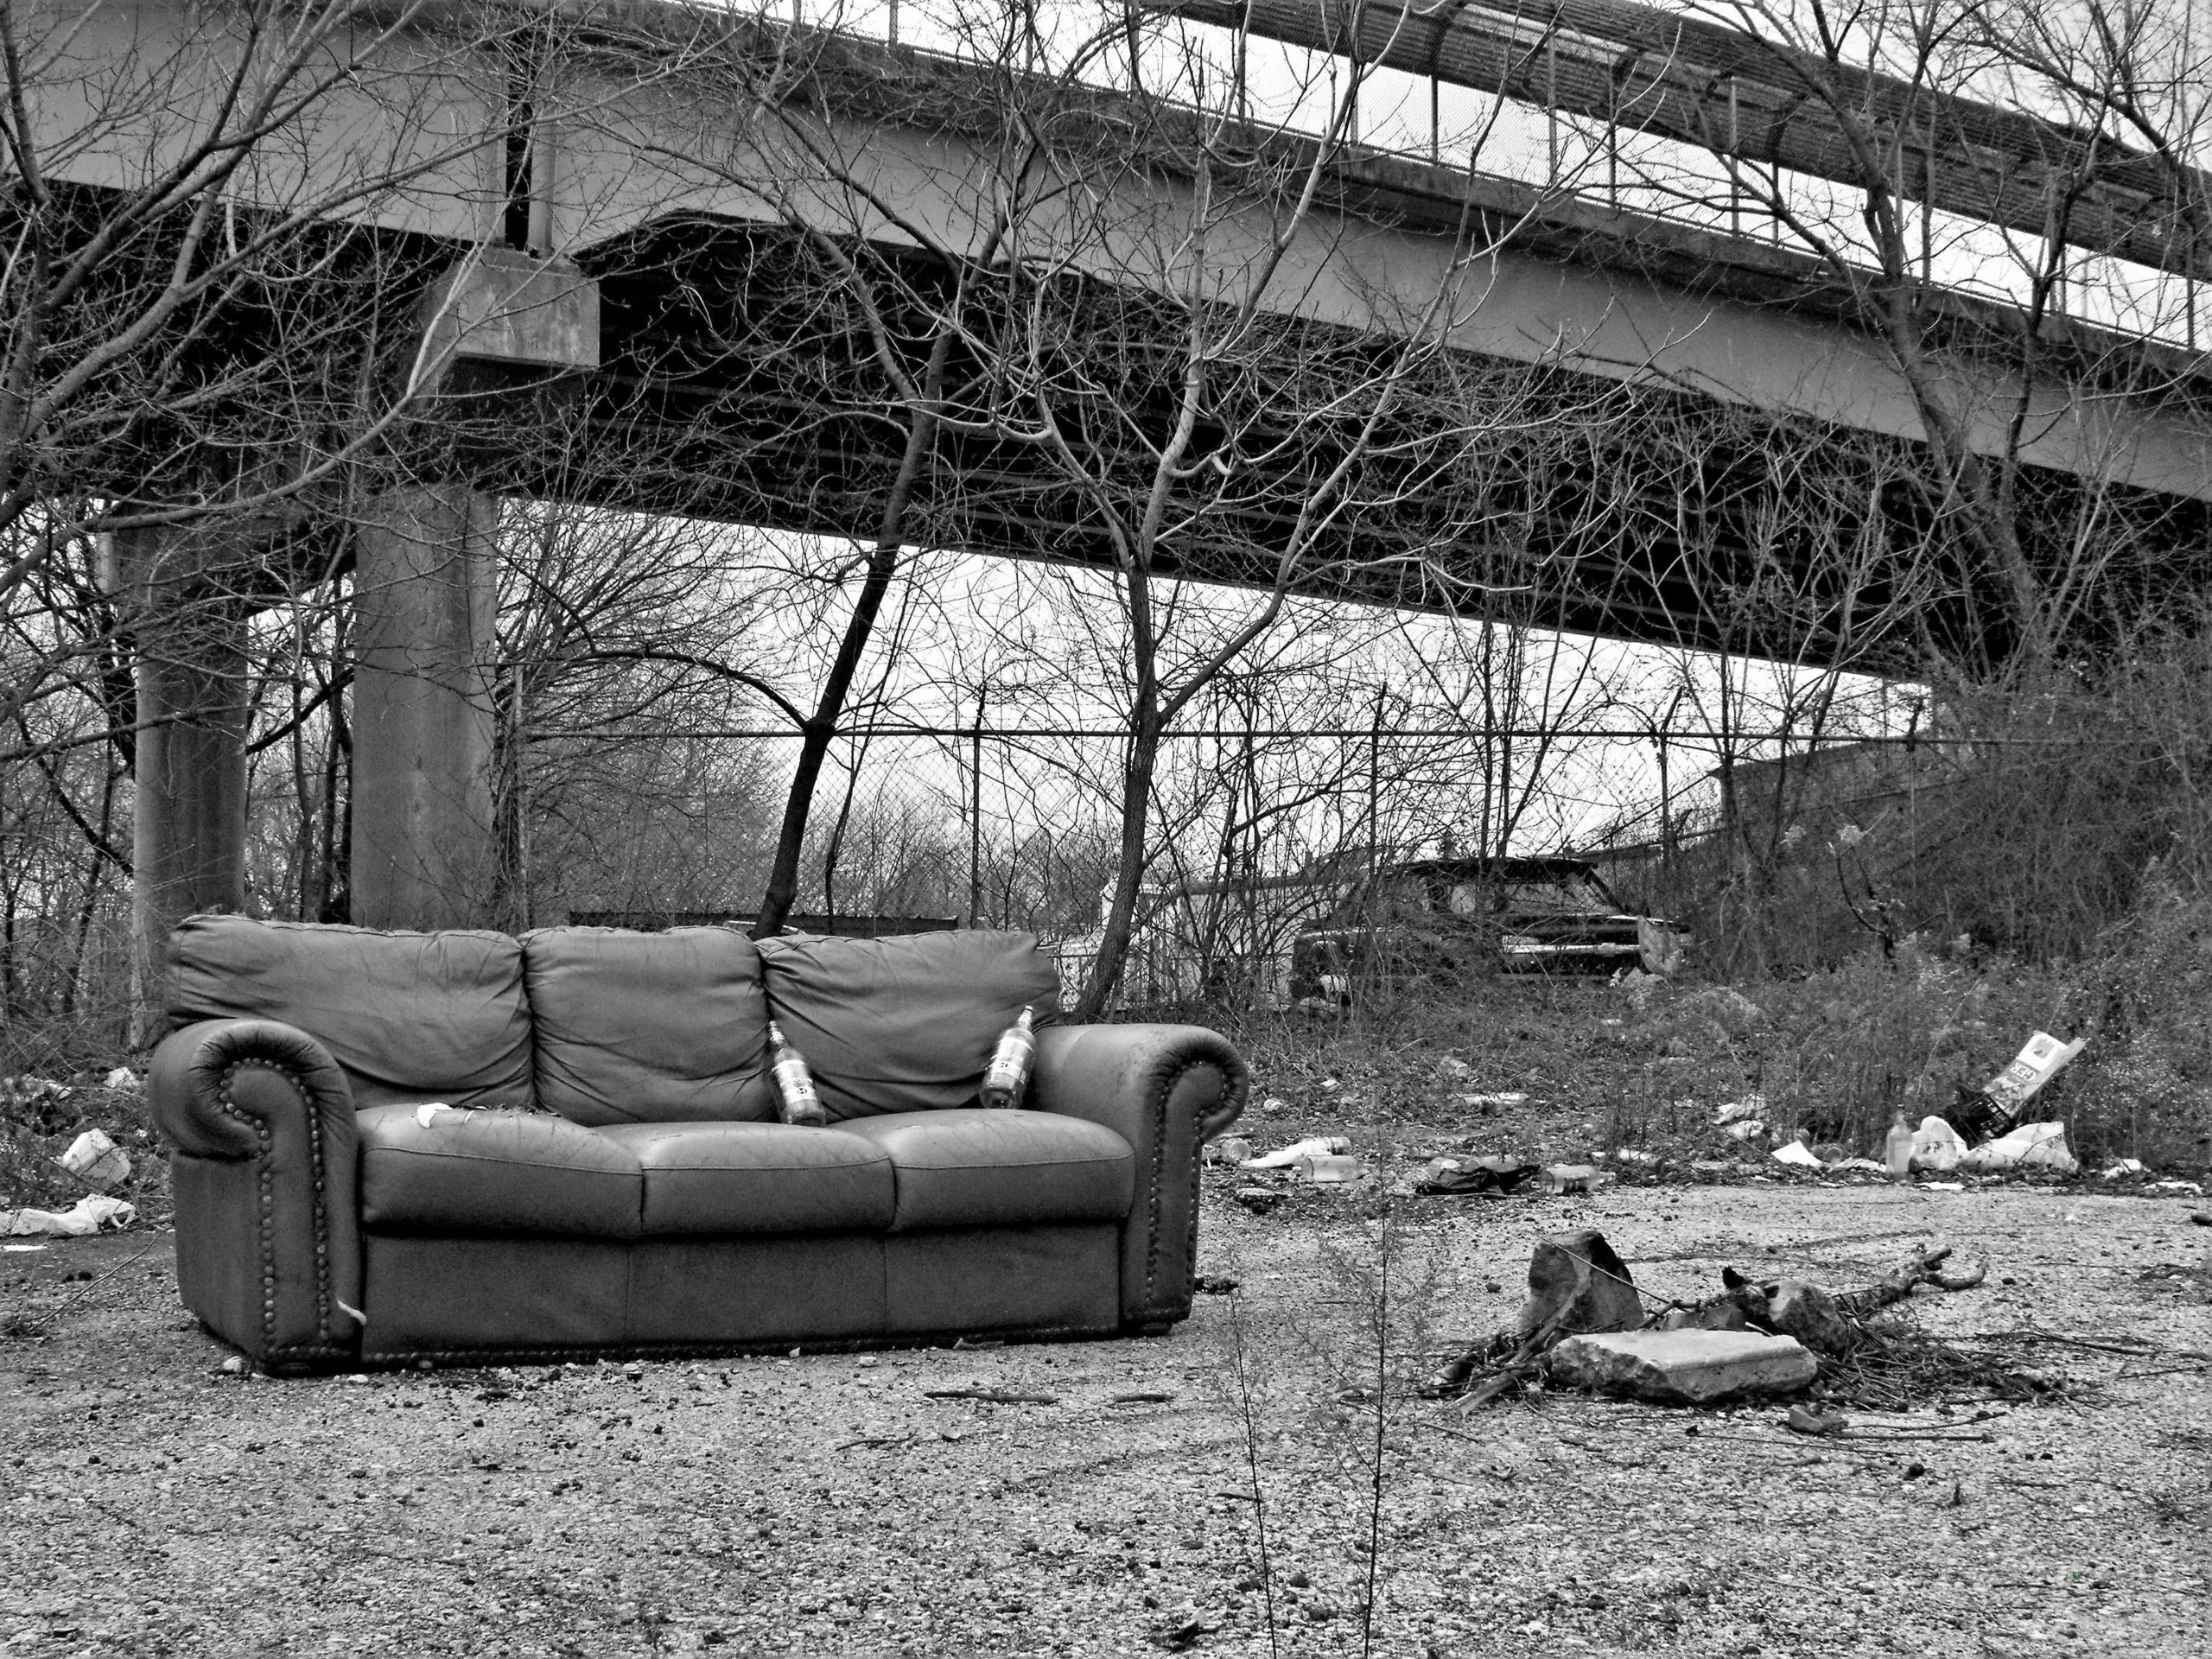 "Hobo Couch" by Carl Kaucher